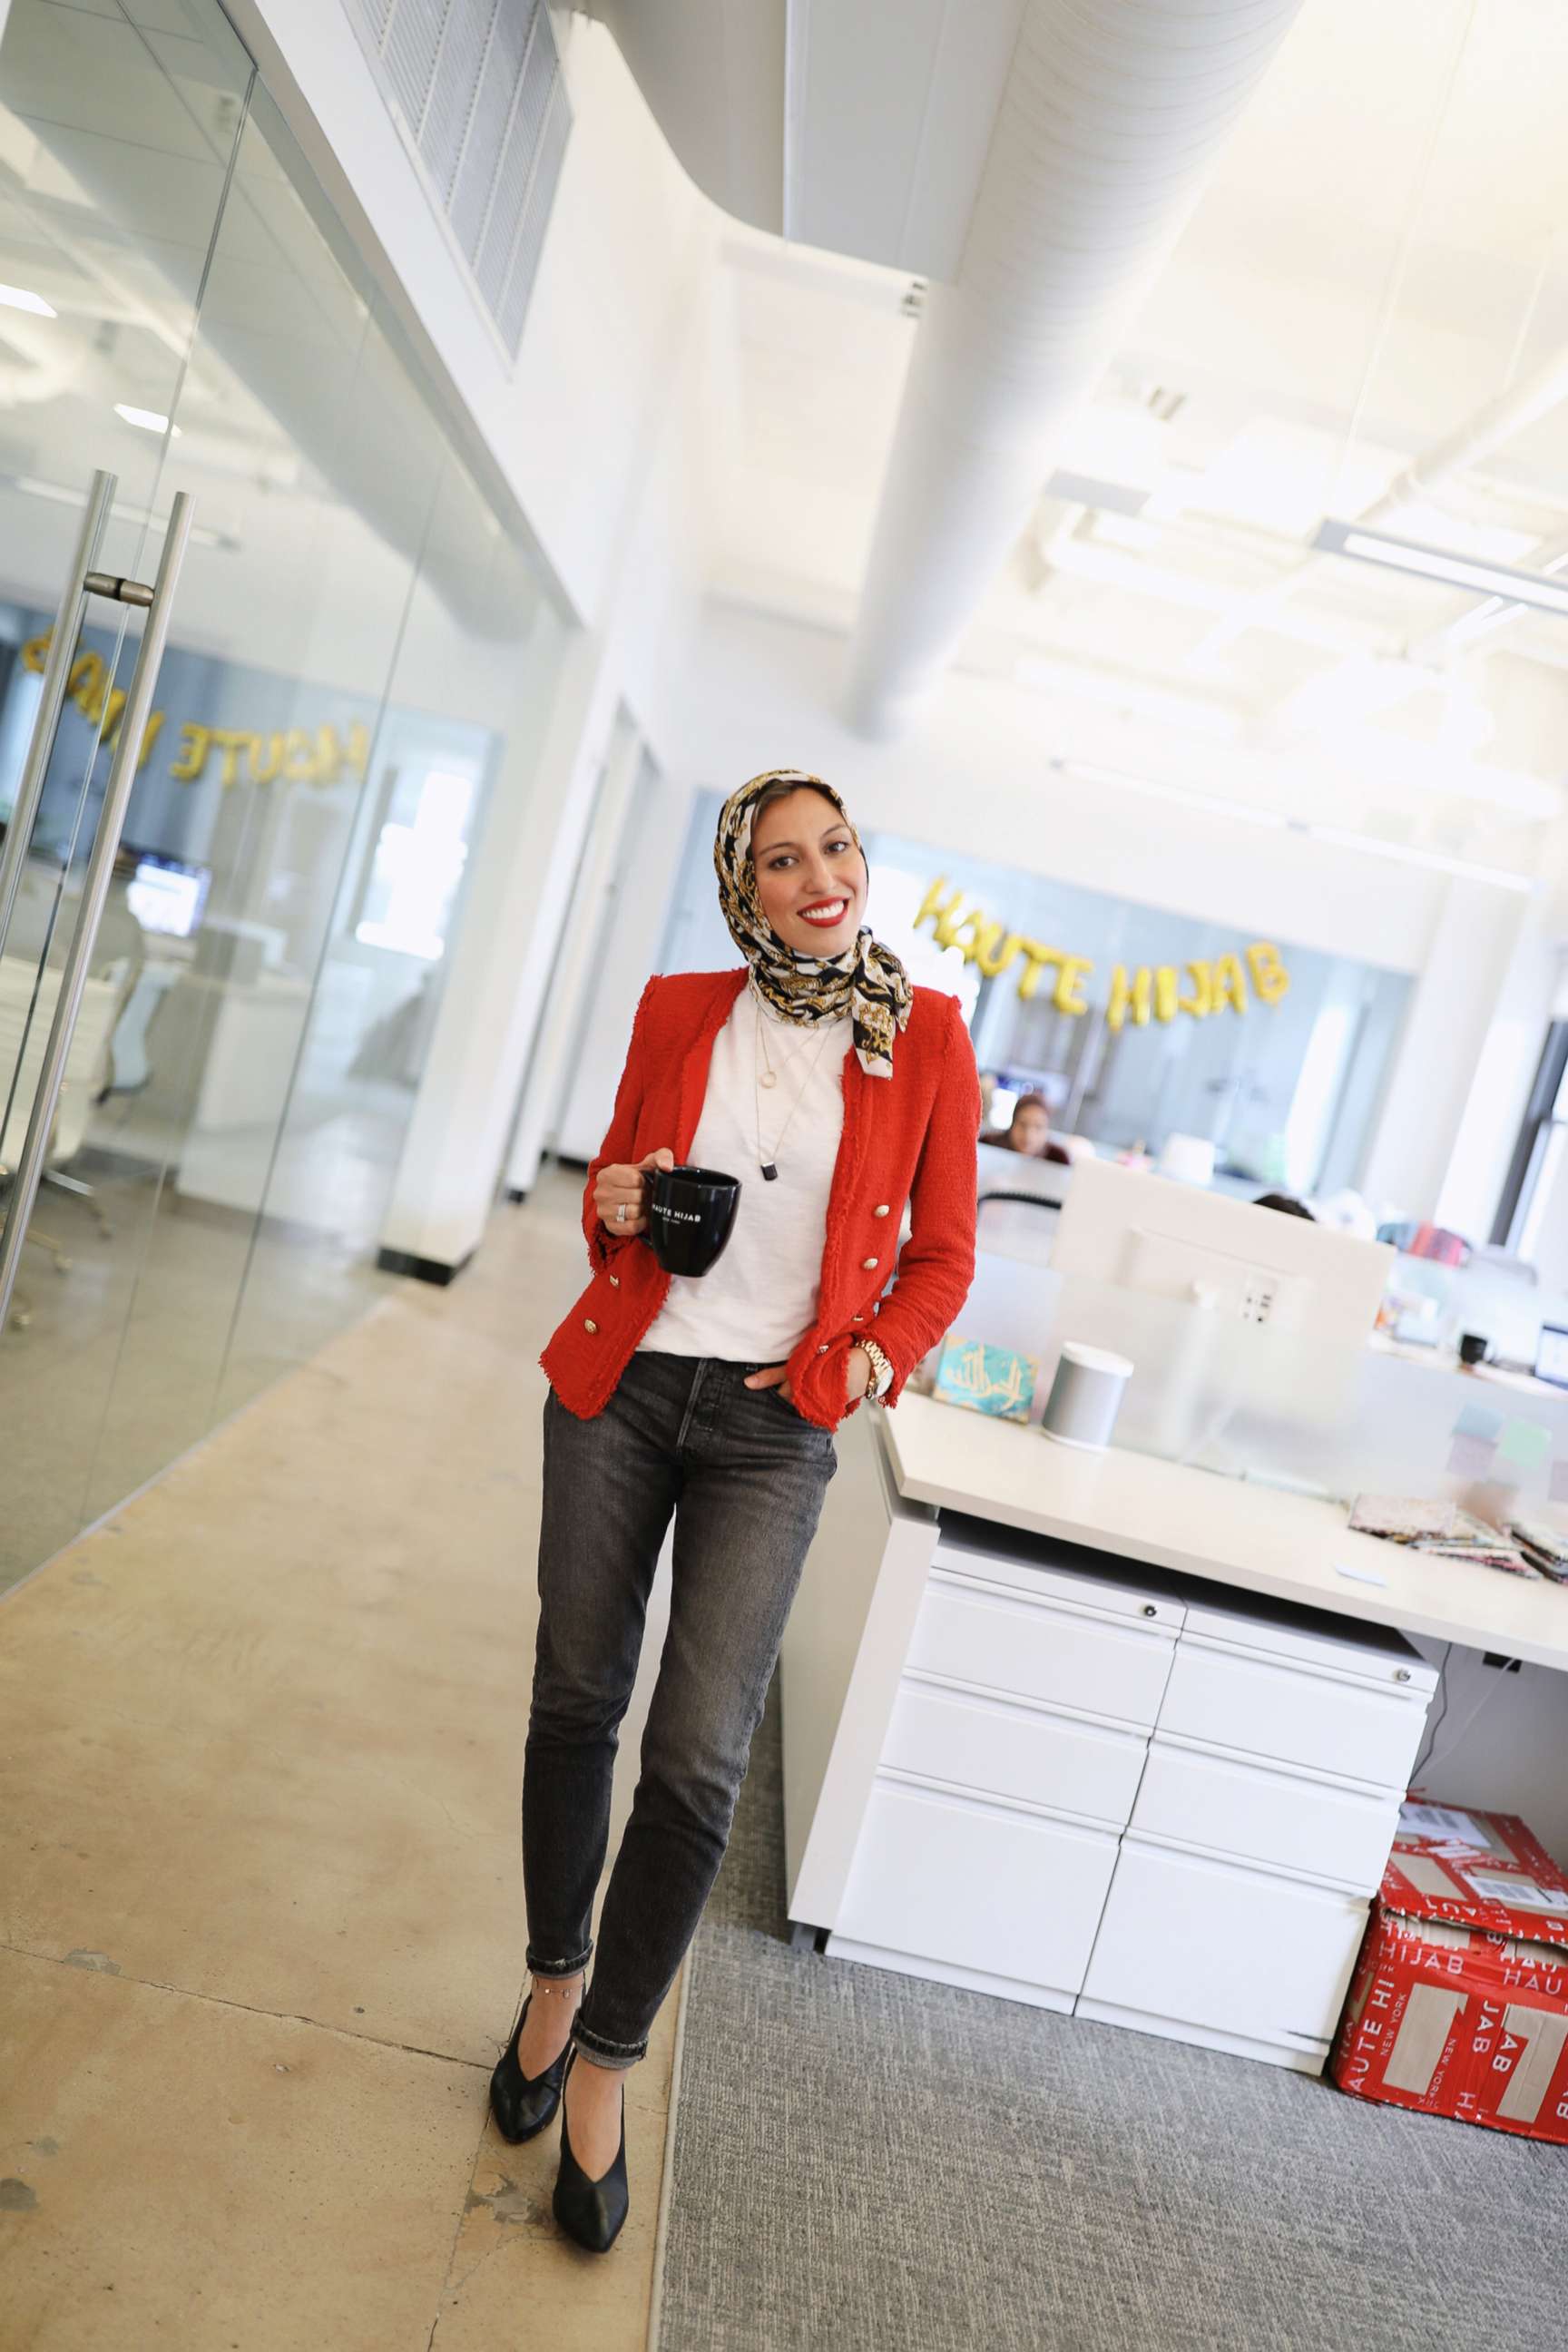 PHOTO: Melanie Elturk, co-founder and CEO of Haute Hijab, is pictured in her office in downtown Manhattan in 2019.